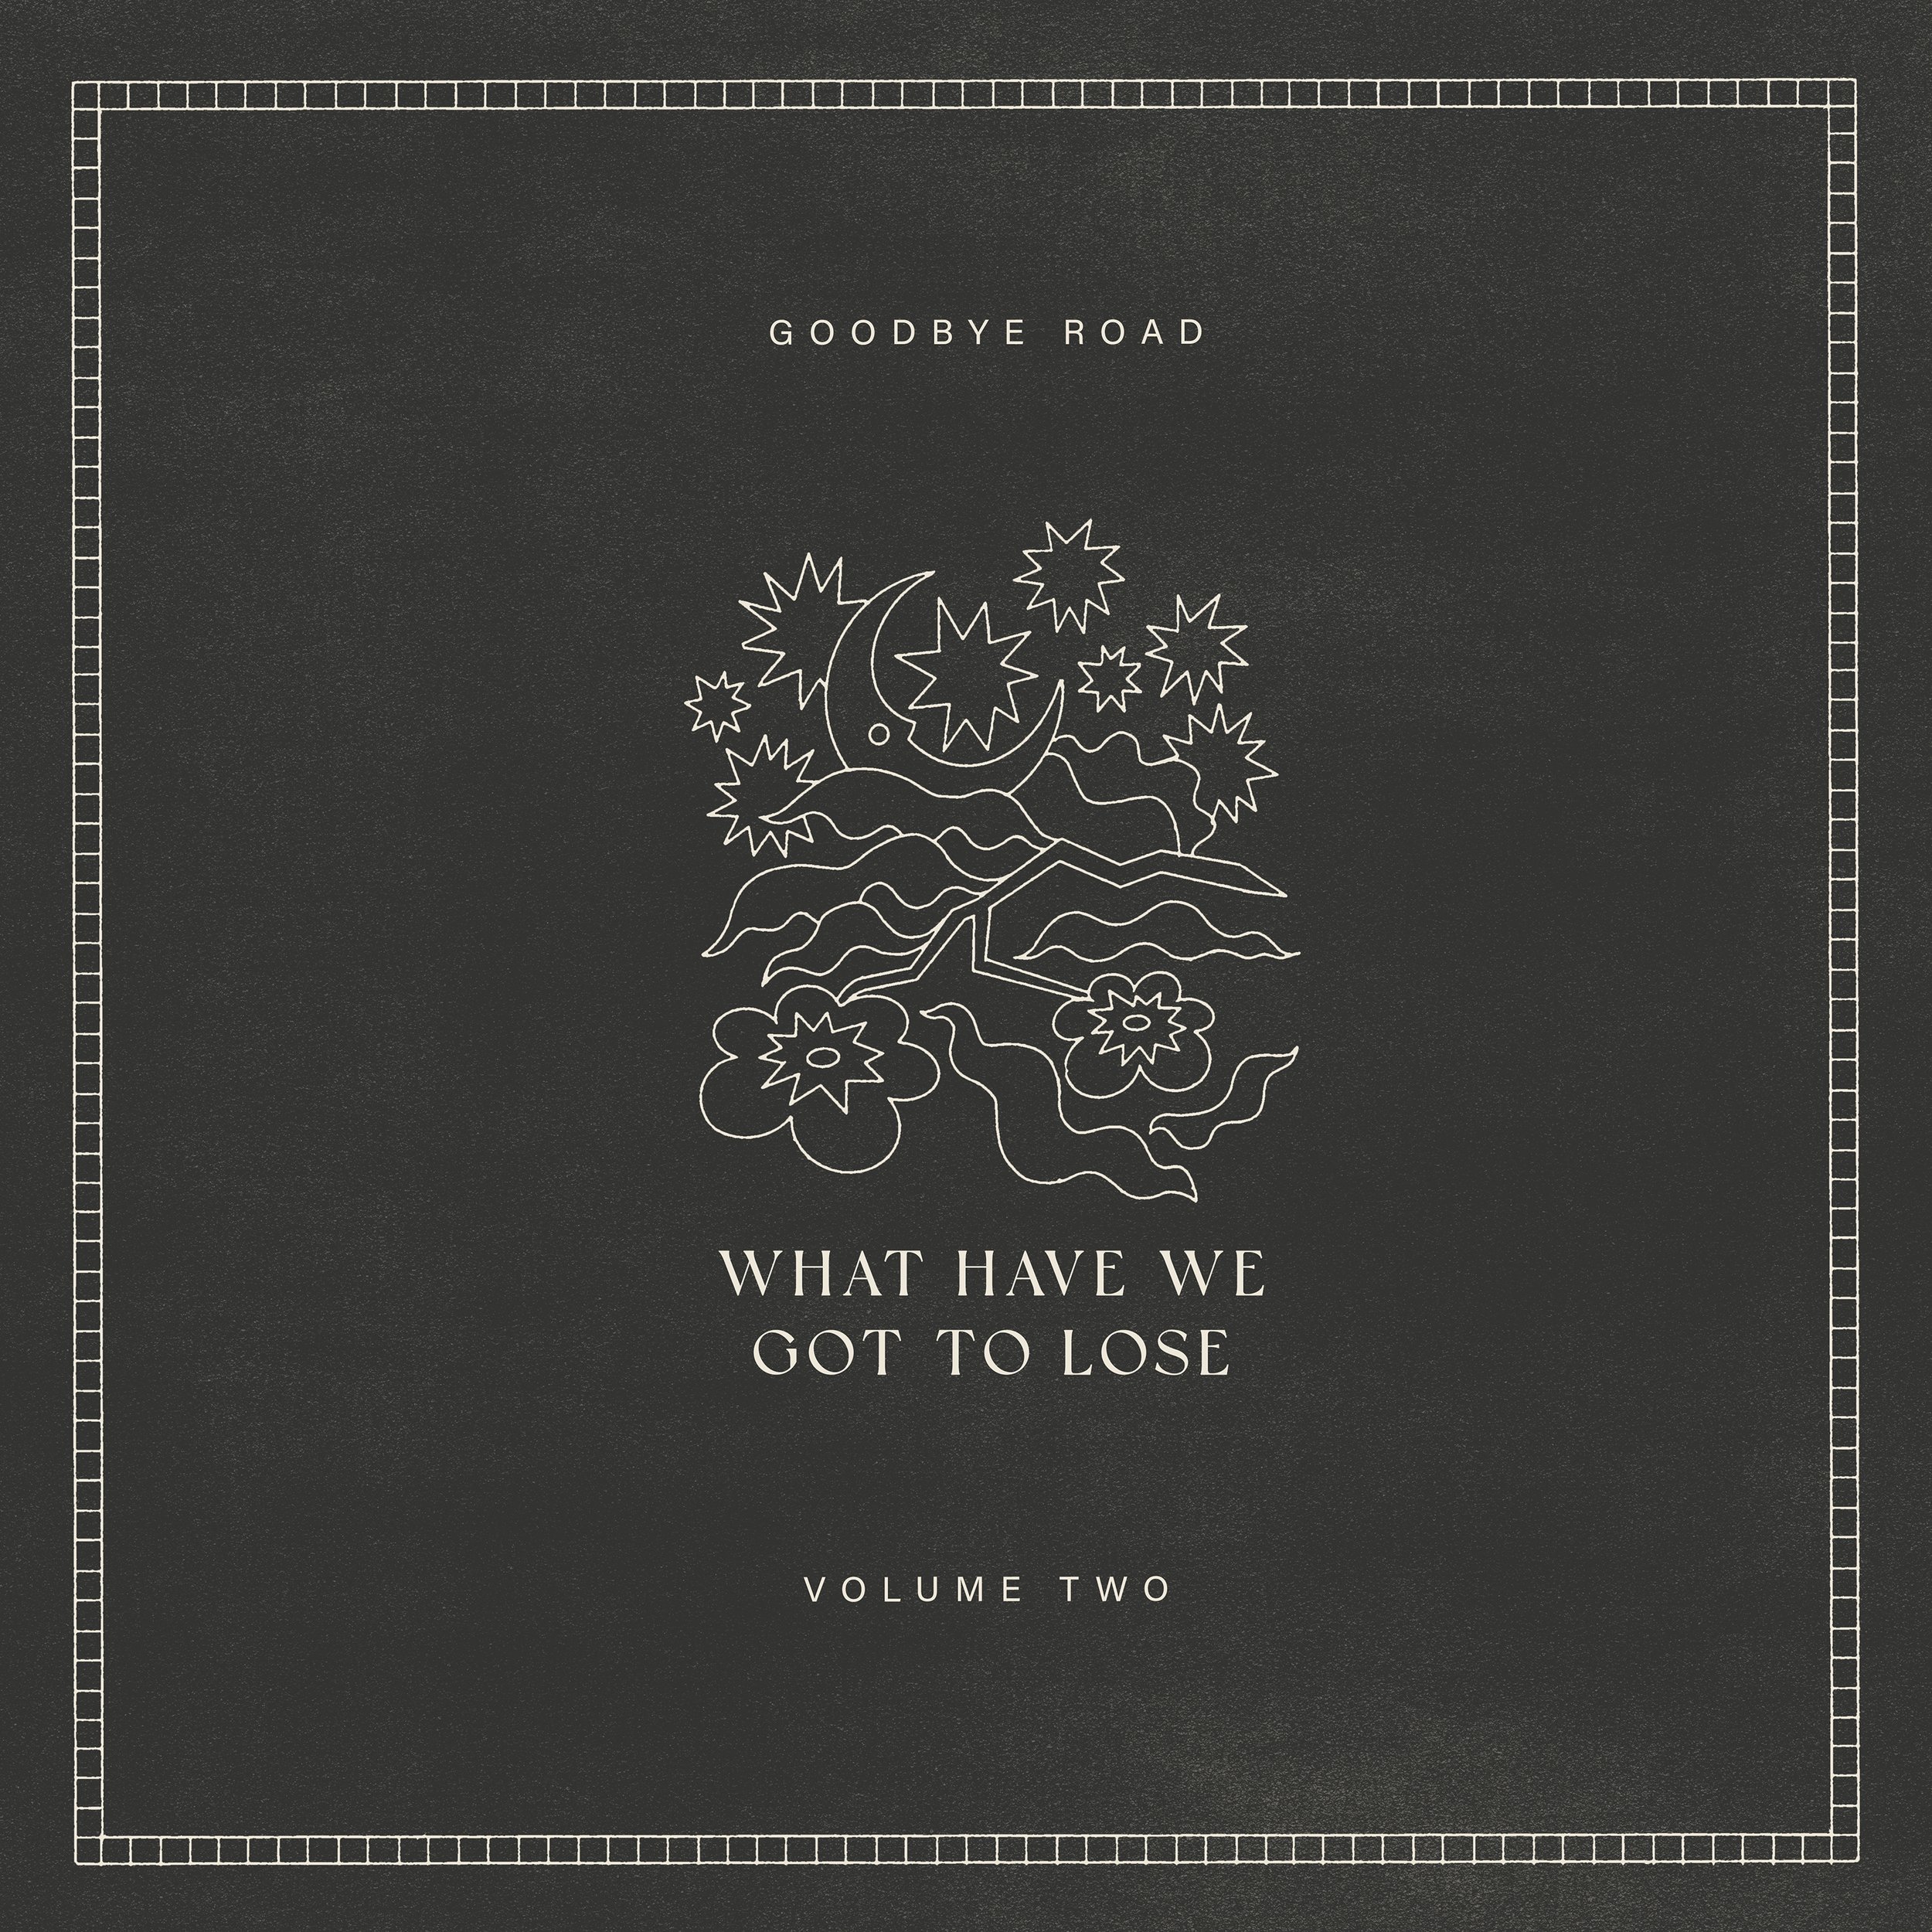 Goodbye Road - “What Have We Got To Lose” - Single